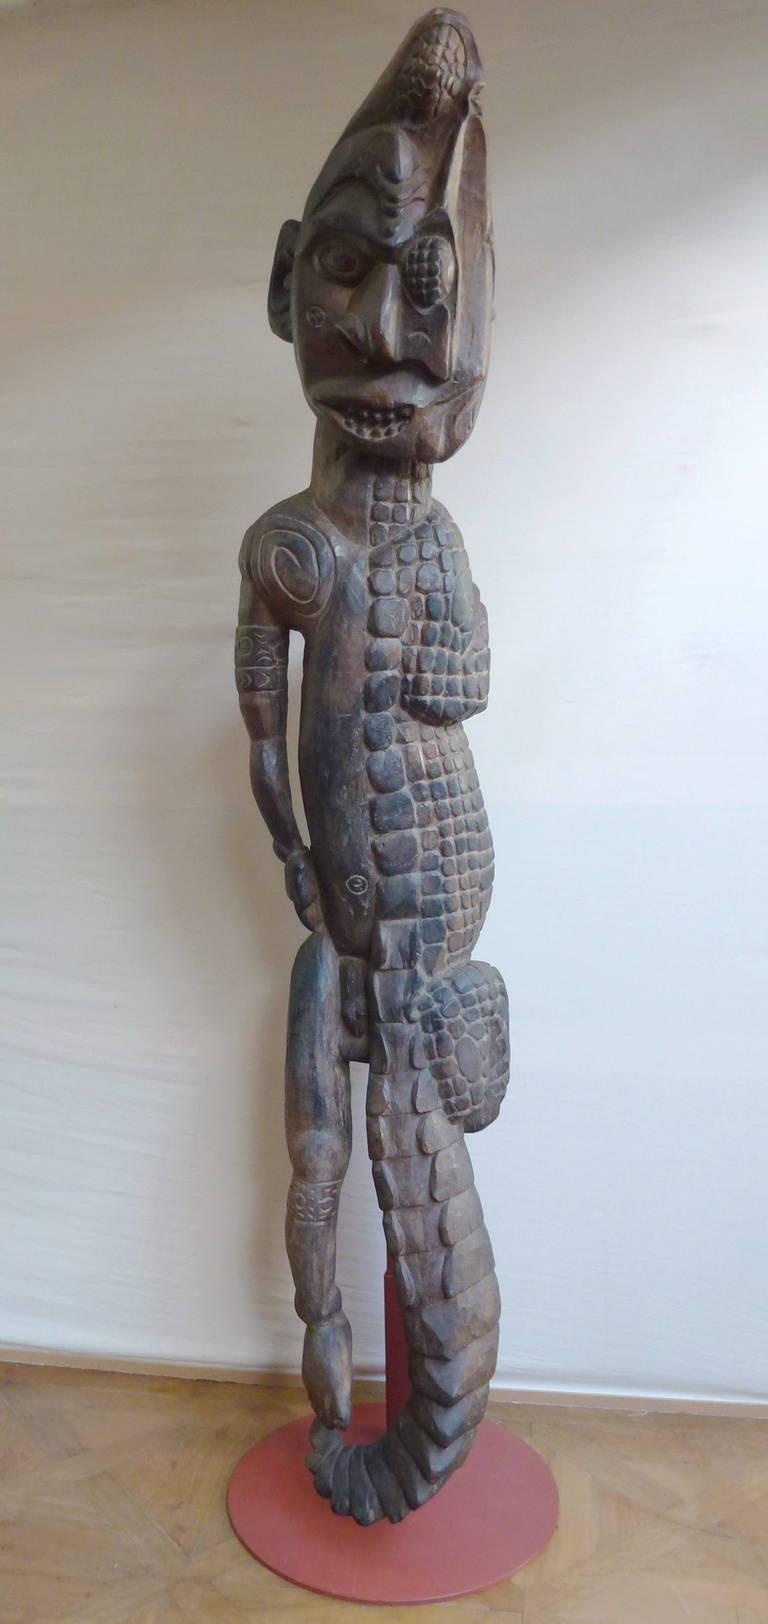 Carved as half a man, half a crocodile, from the Sepik river area in Papua New Guinea. Carved wood with black pigments on a modern iron stand.

Life in the Sepik area revolves around the river. The Sepik is a gallery of tribal art, each village